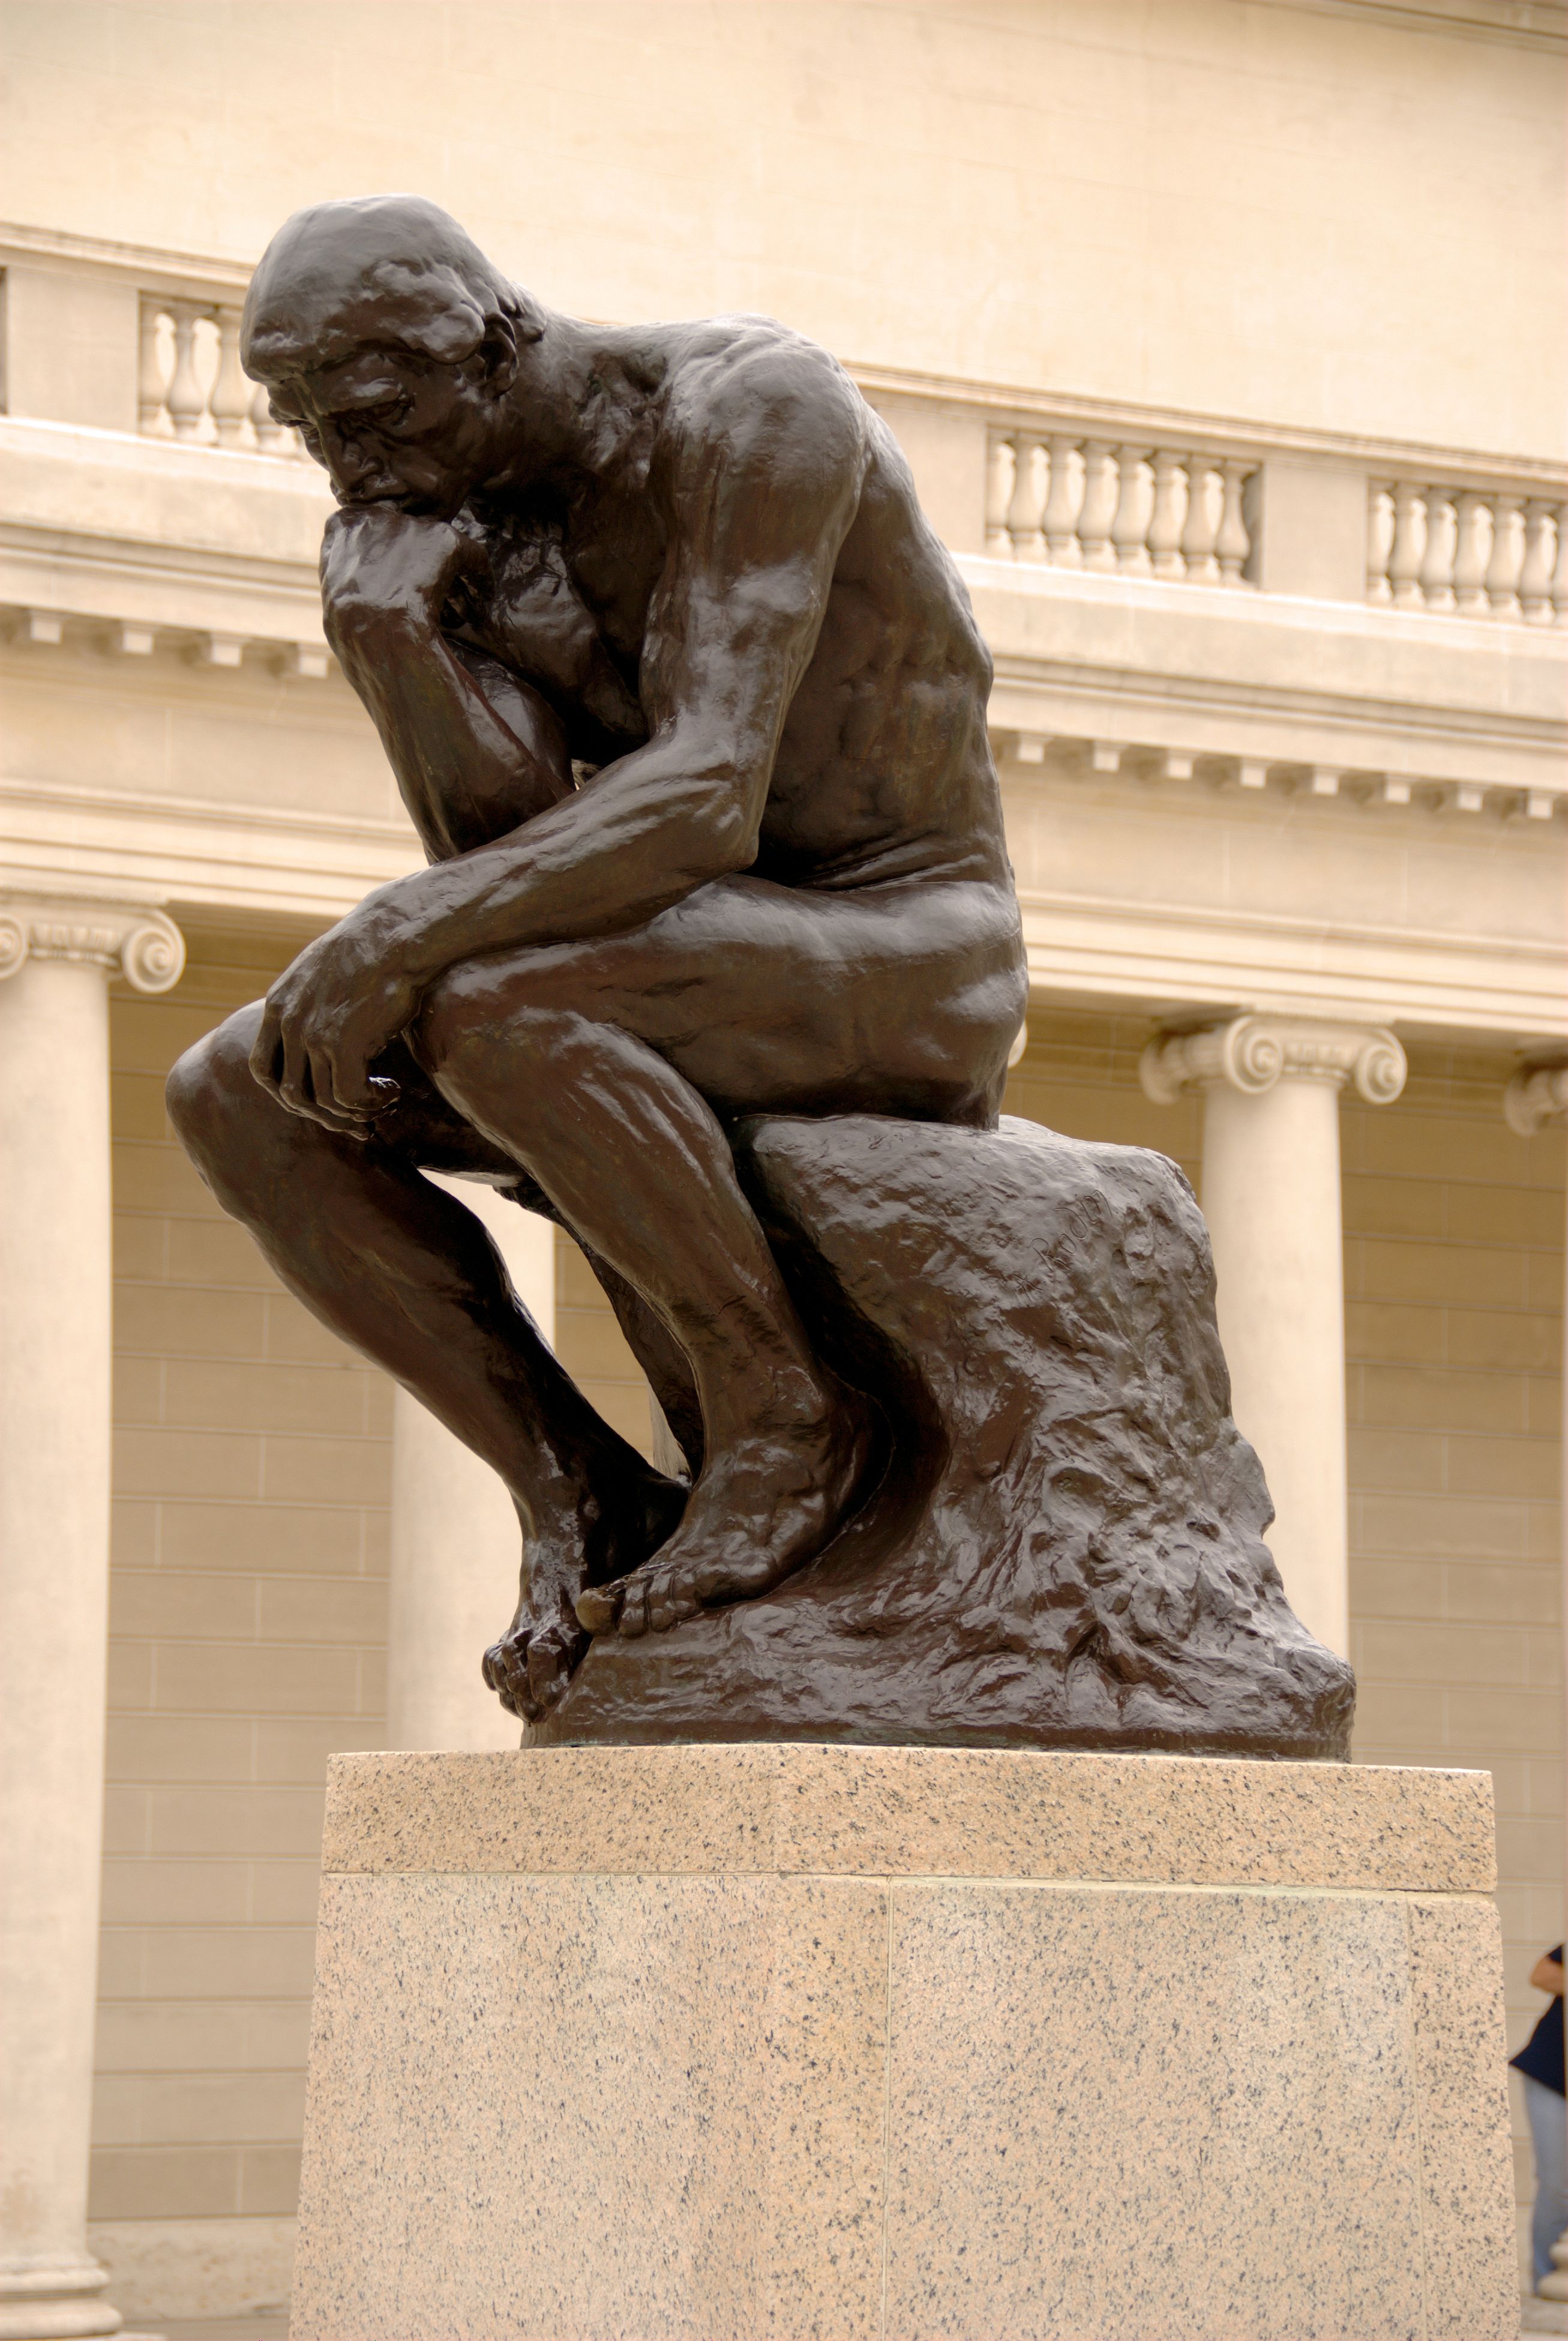 The Thinker by Auguste Rodin - 1880 - 6 ft. 6 in Legion of Honor